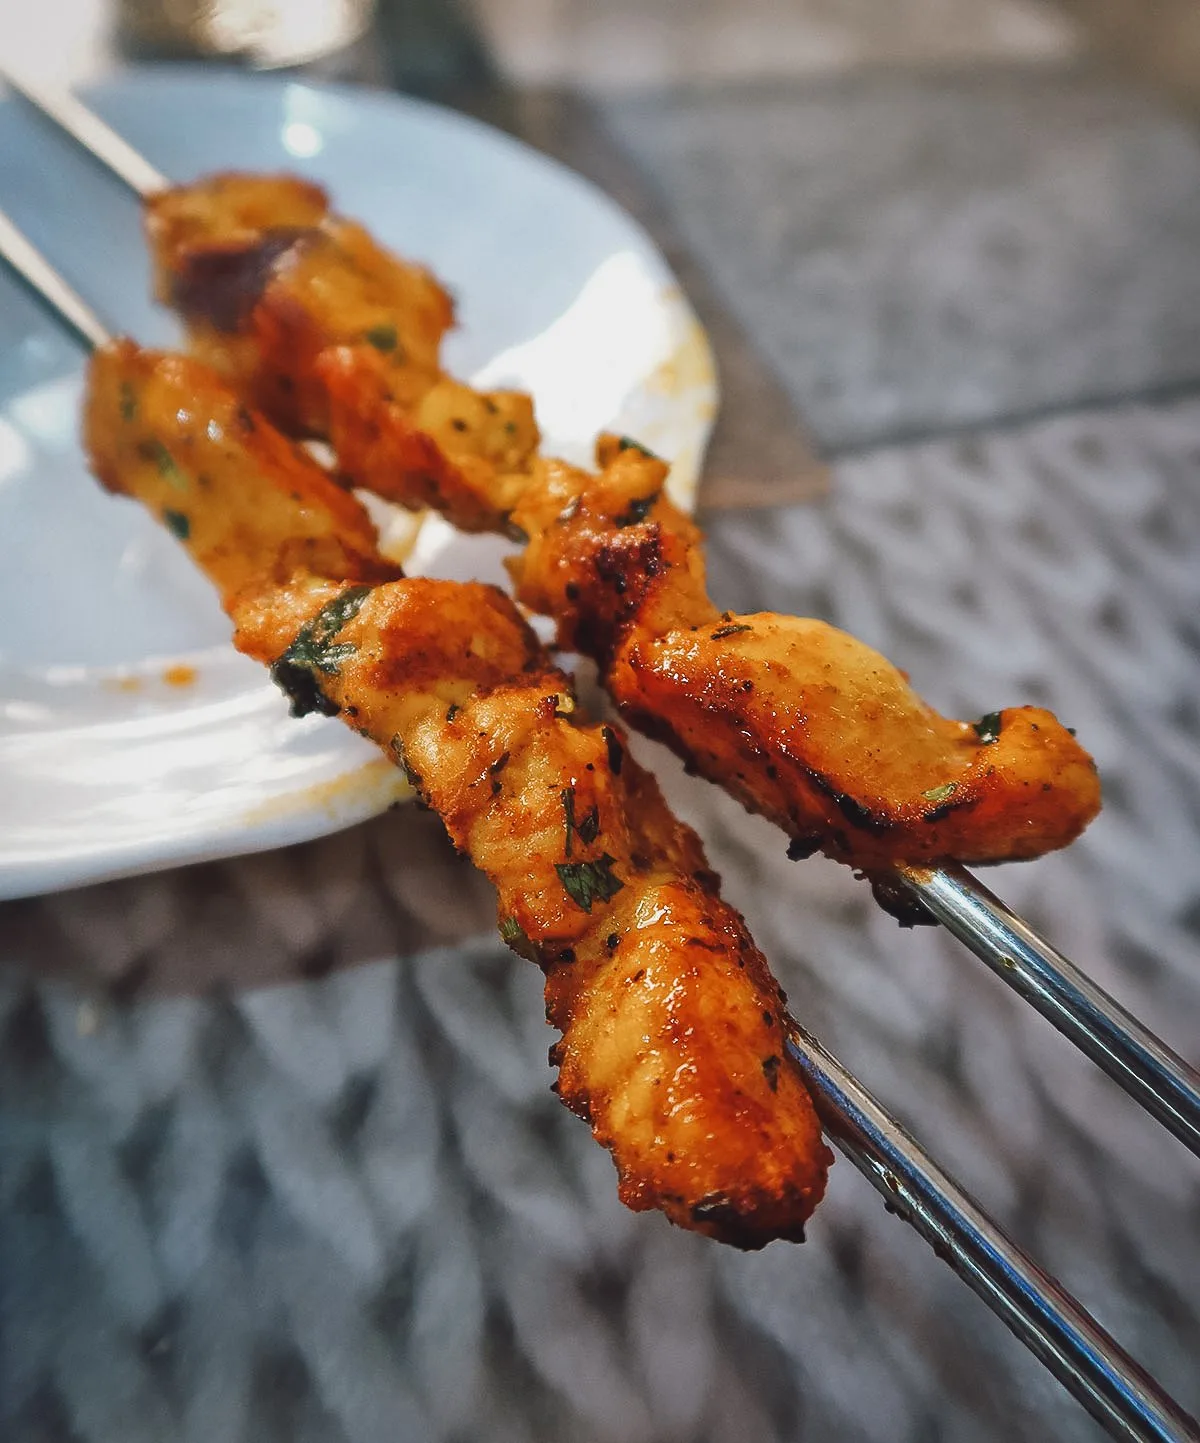 Chicken skewers at a restaurant in Tangier